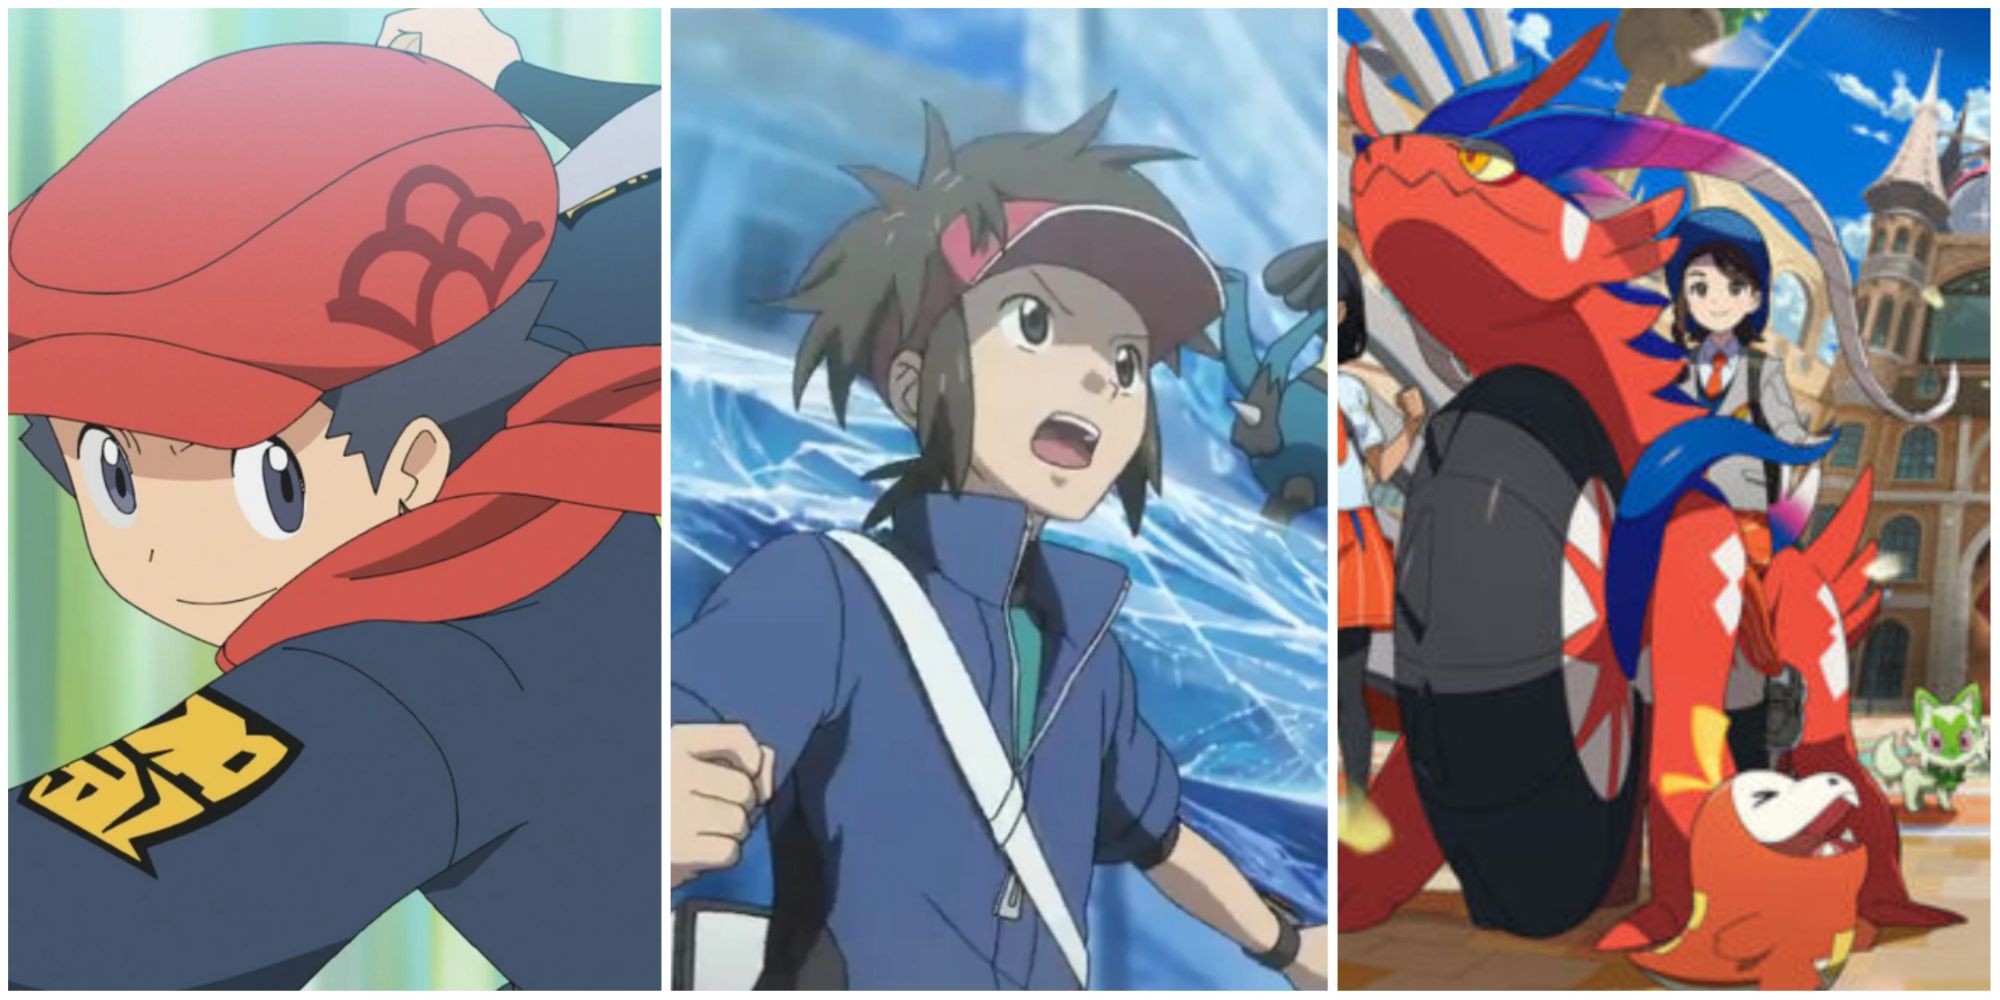 10 Pokémon Game Protagonists Who Could Lead The Anime